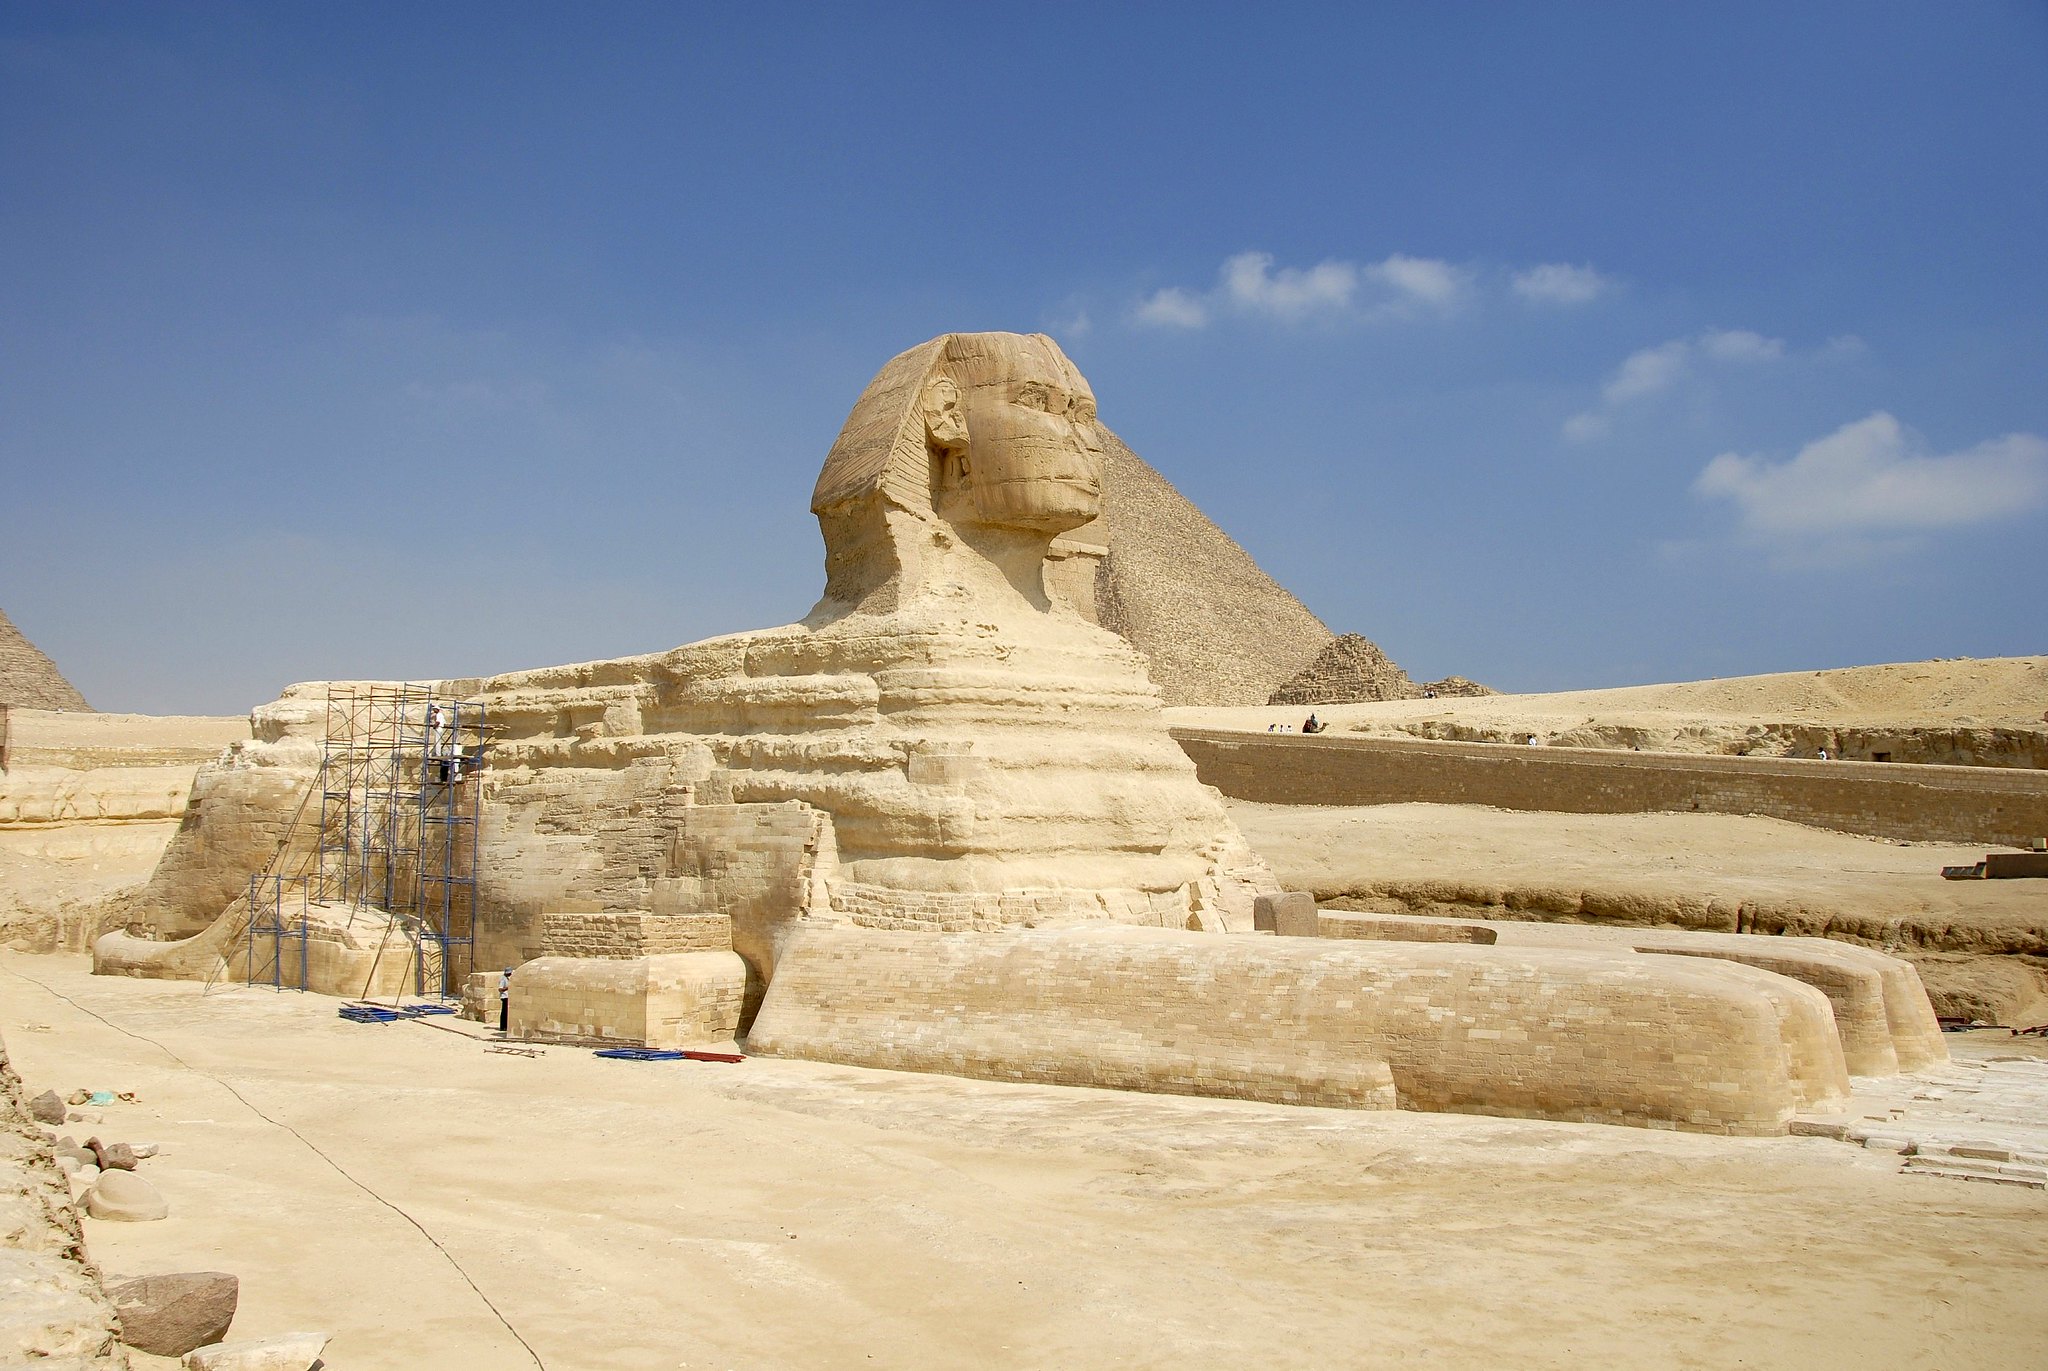 The Great Sphinx (photo: superblinkymac, CC BY-NC-ND 2.0)